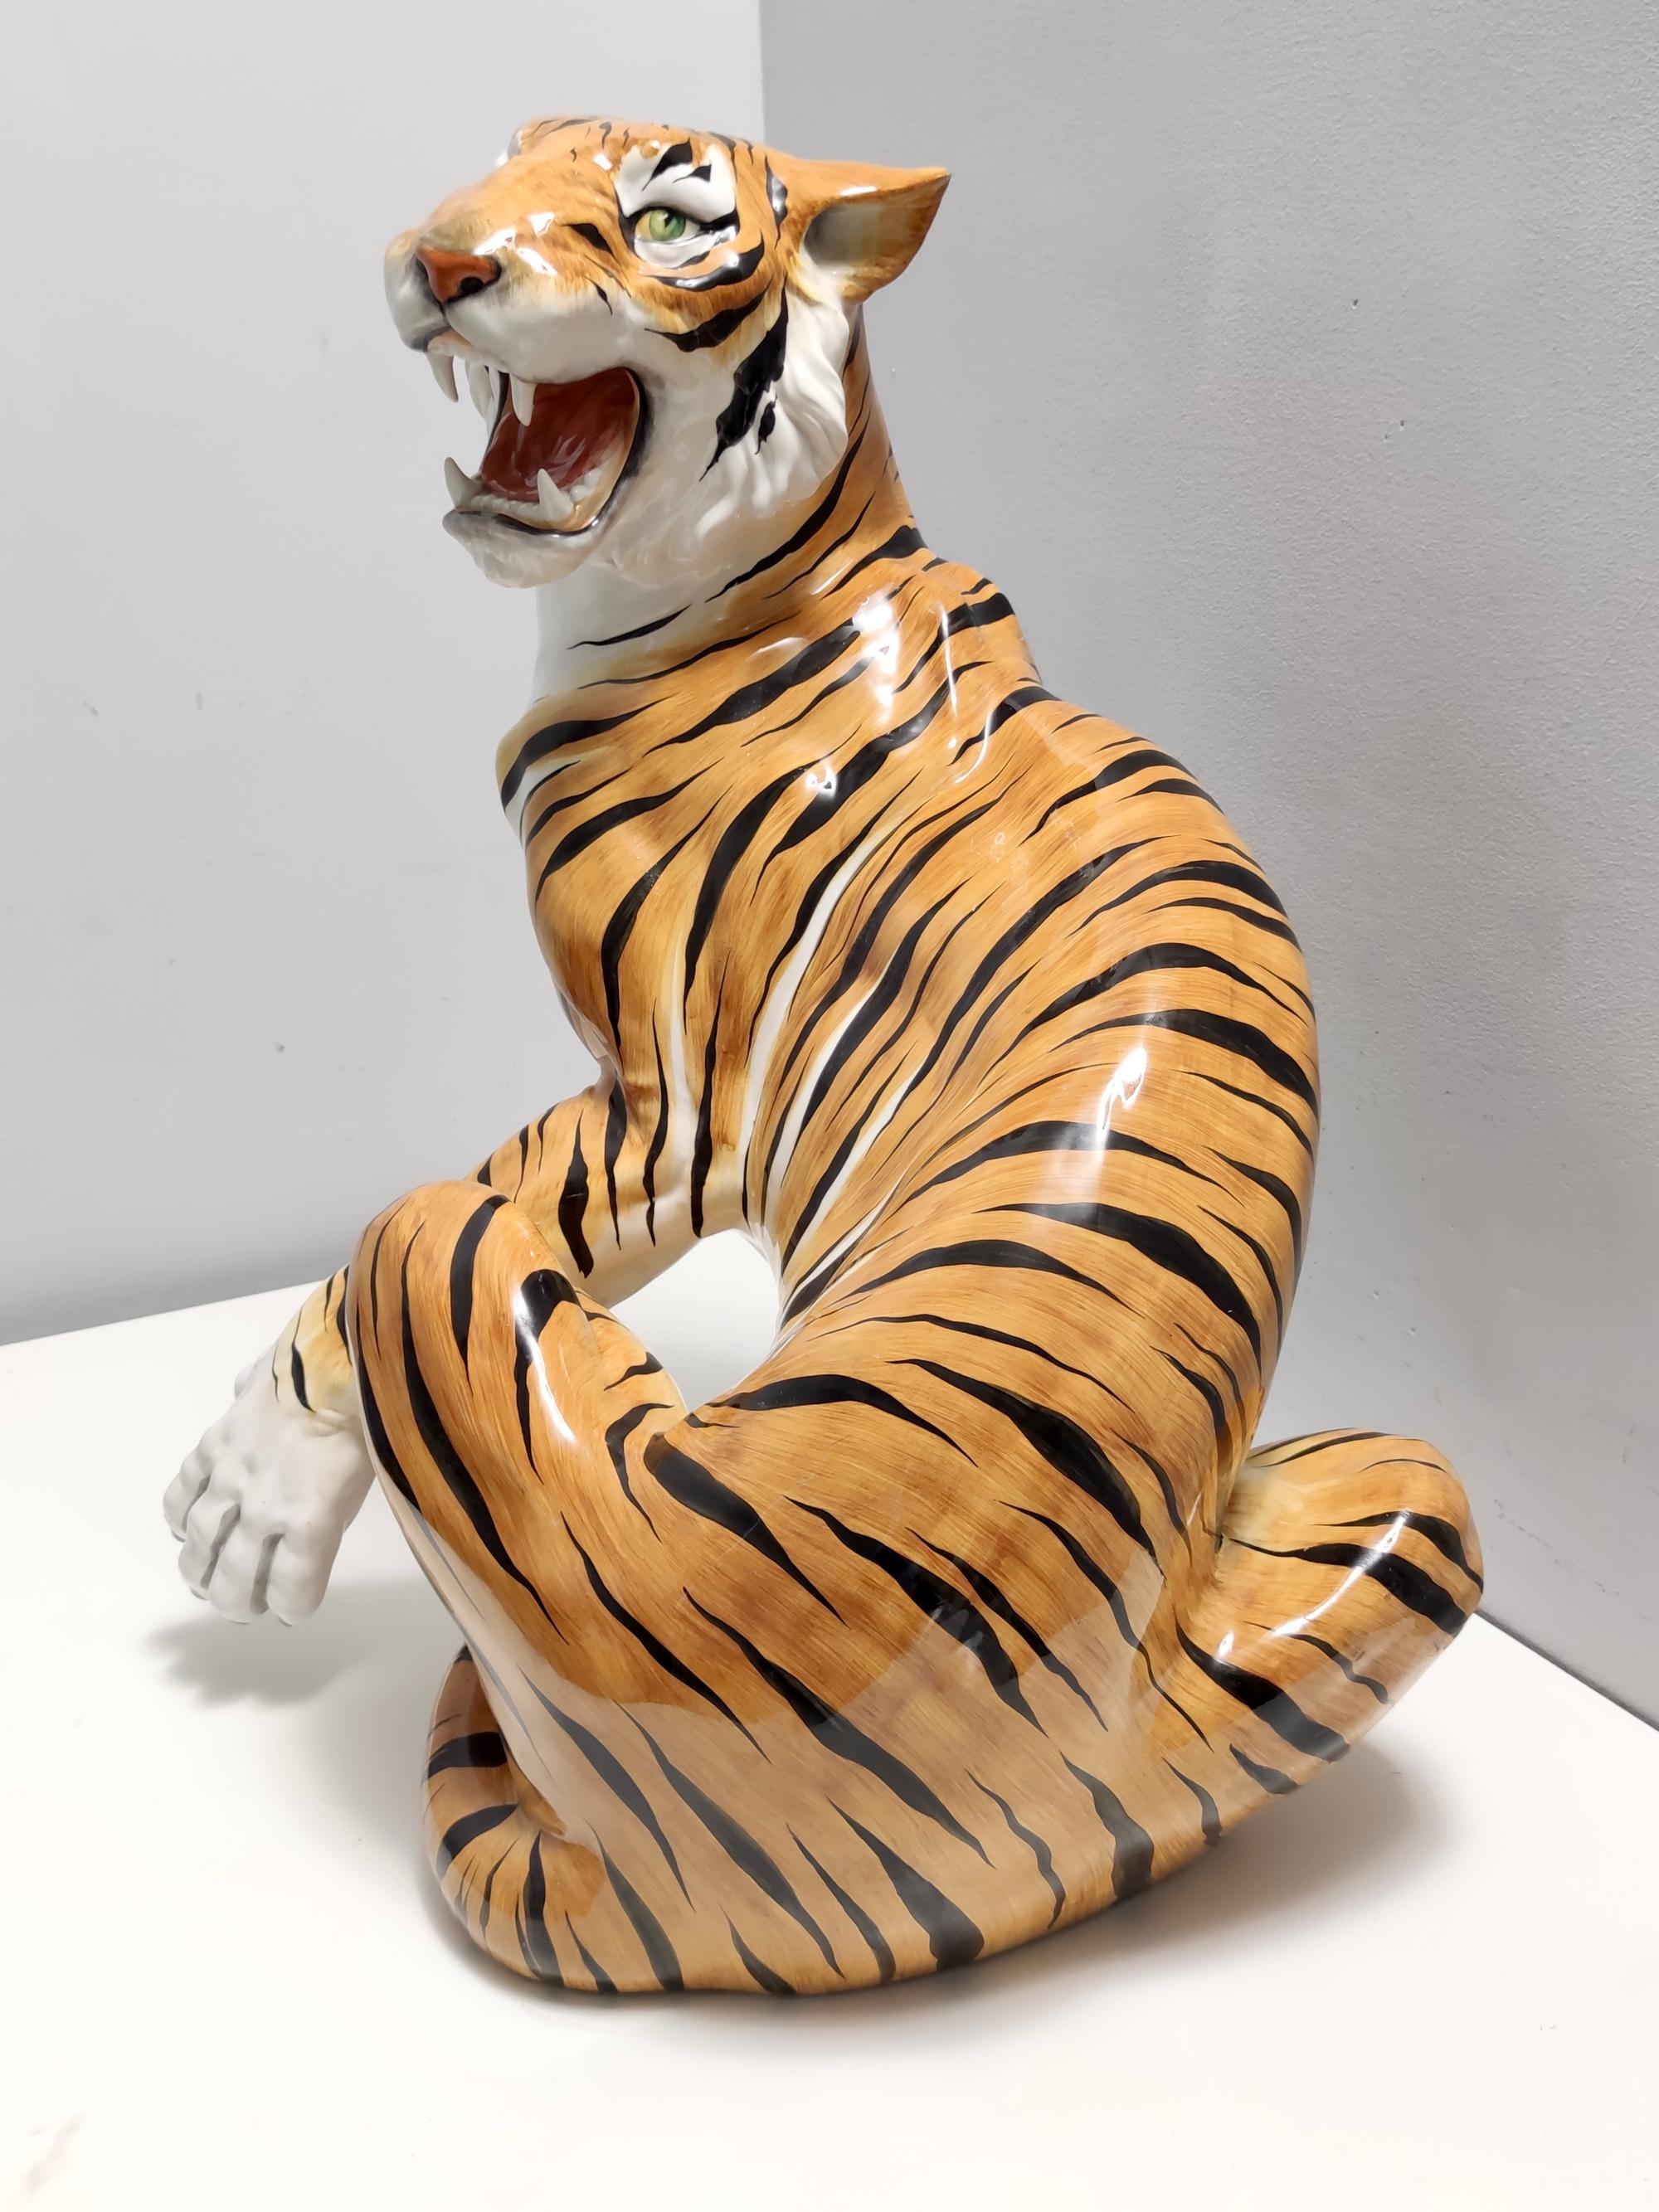 Large Vintage Hand Painted Ceramic Roaring Tiger, Italy In Excellent Condition For Sale In Bresso, Lombardy